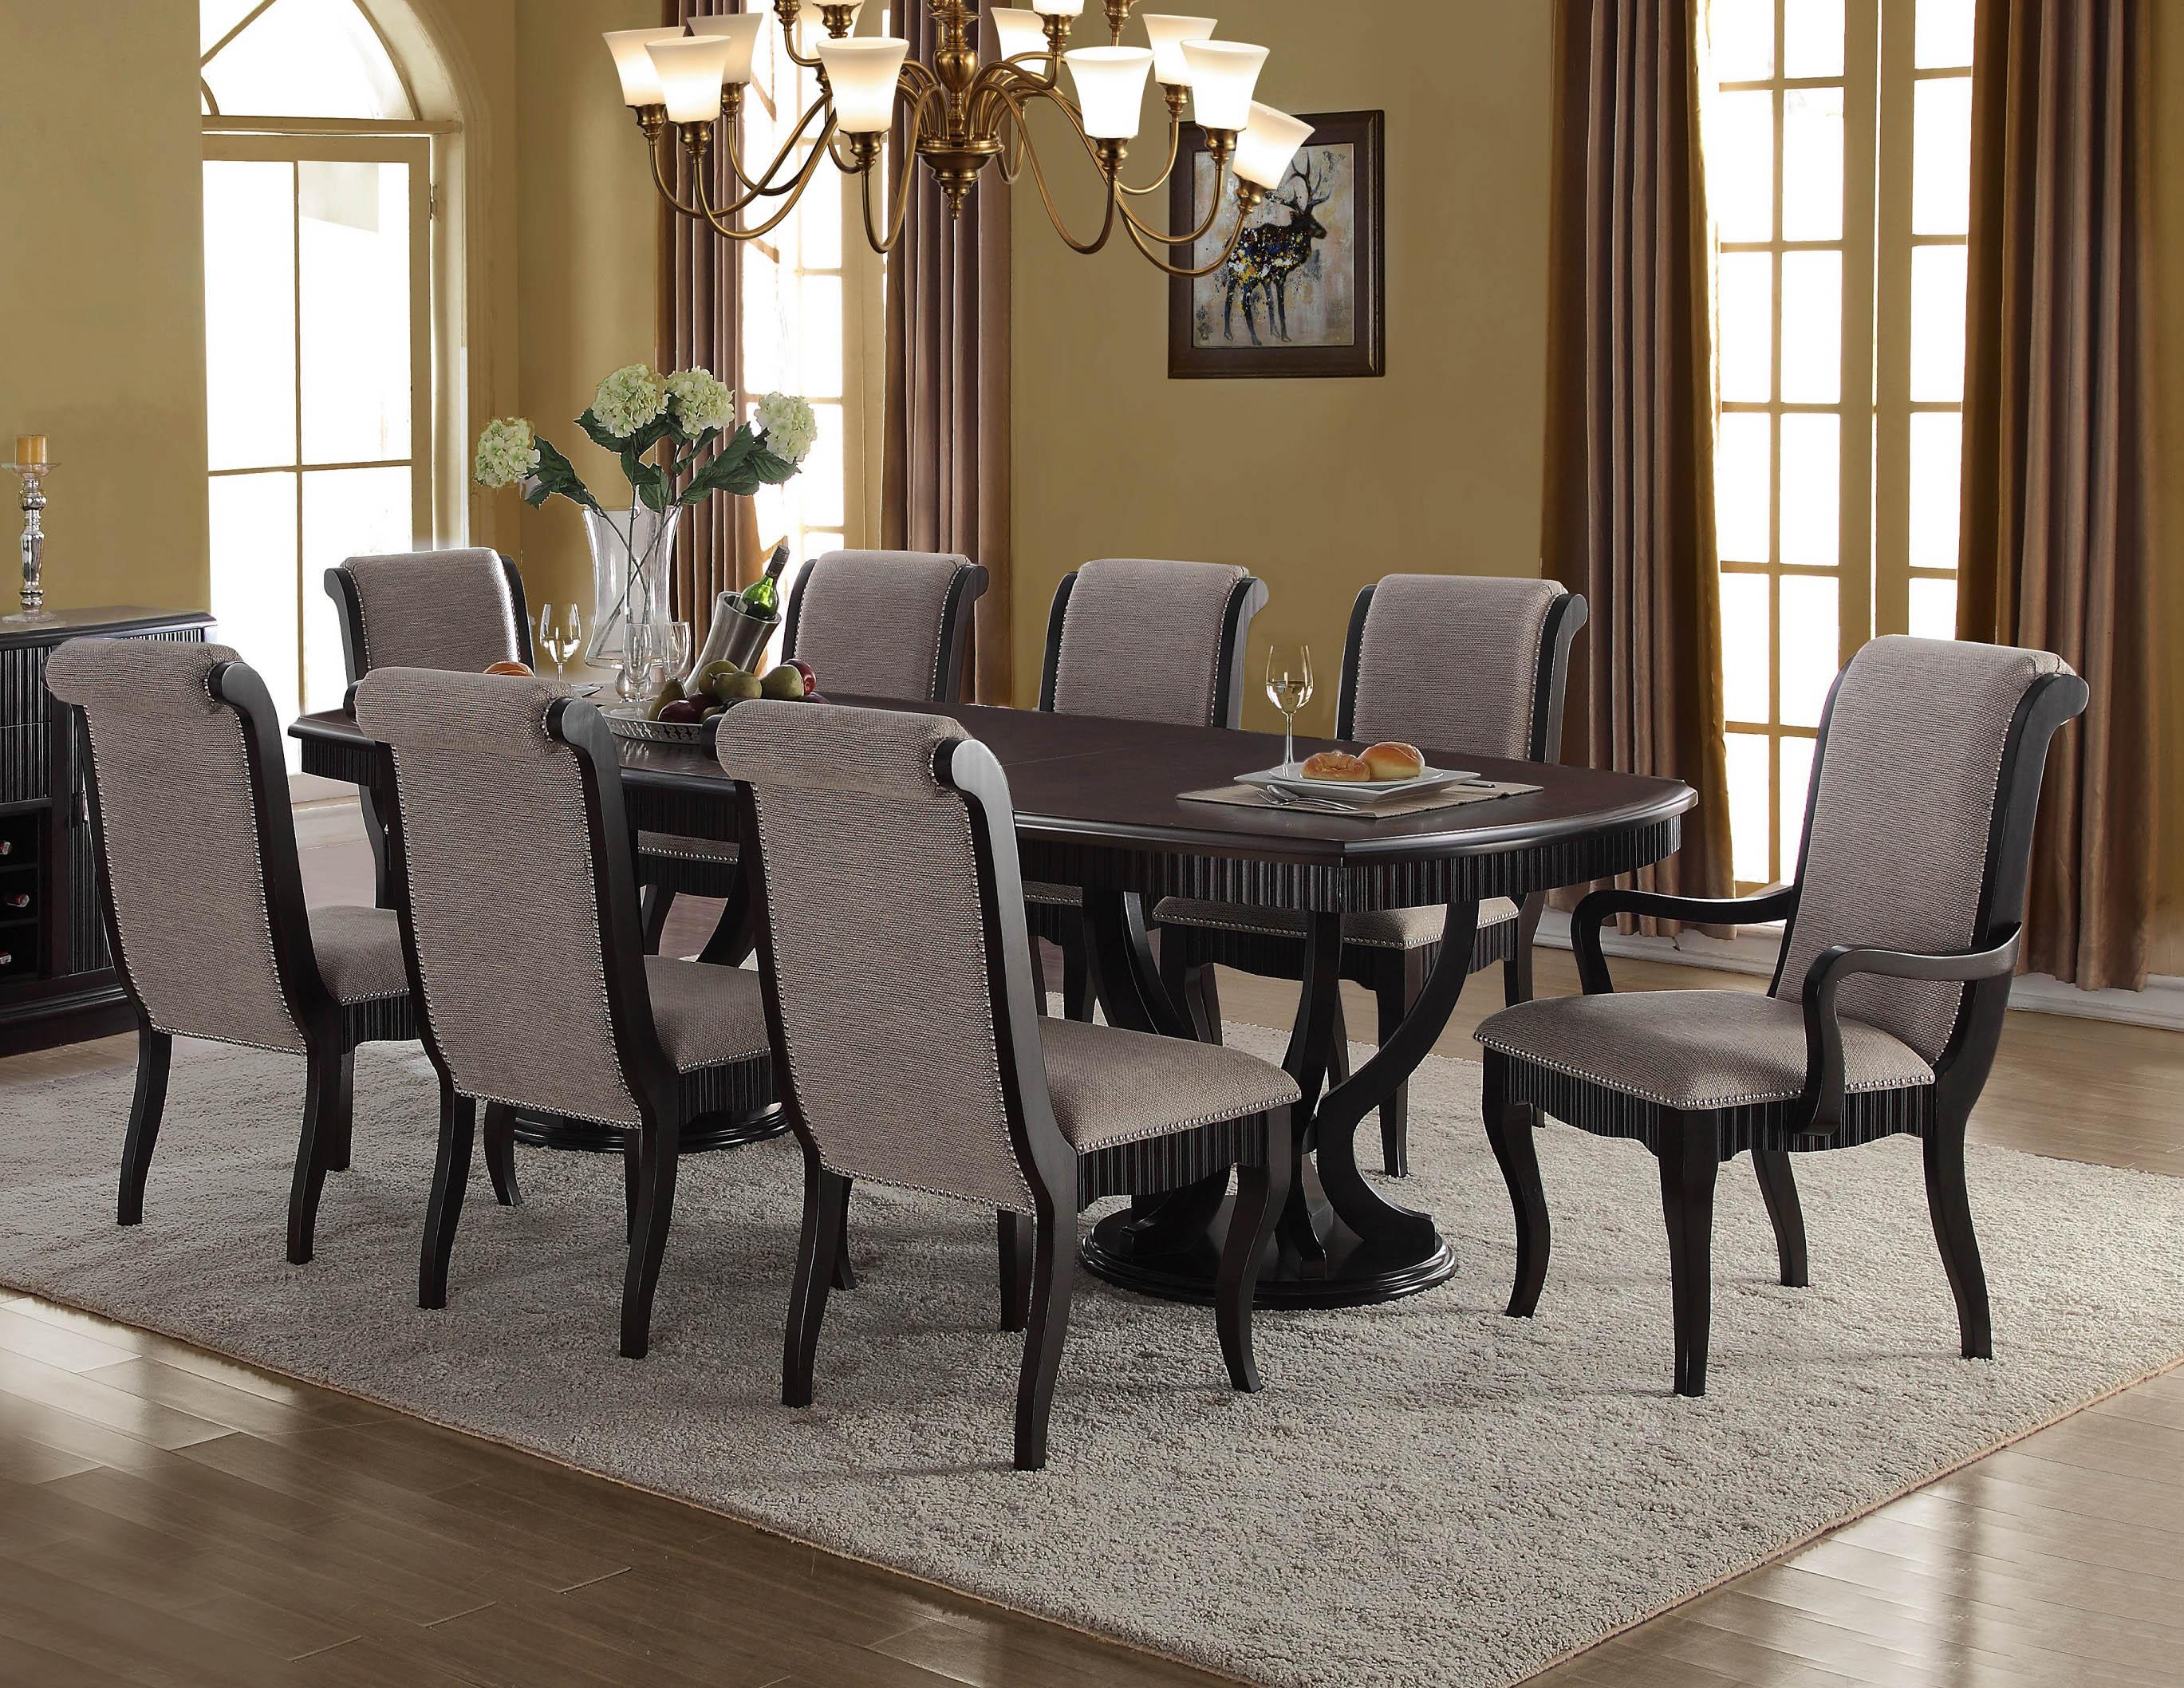 Classic Dining Room Set D1600 D1600-7PC in Dark Brown, Gray Fabric